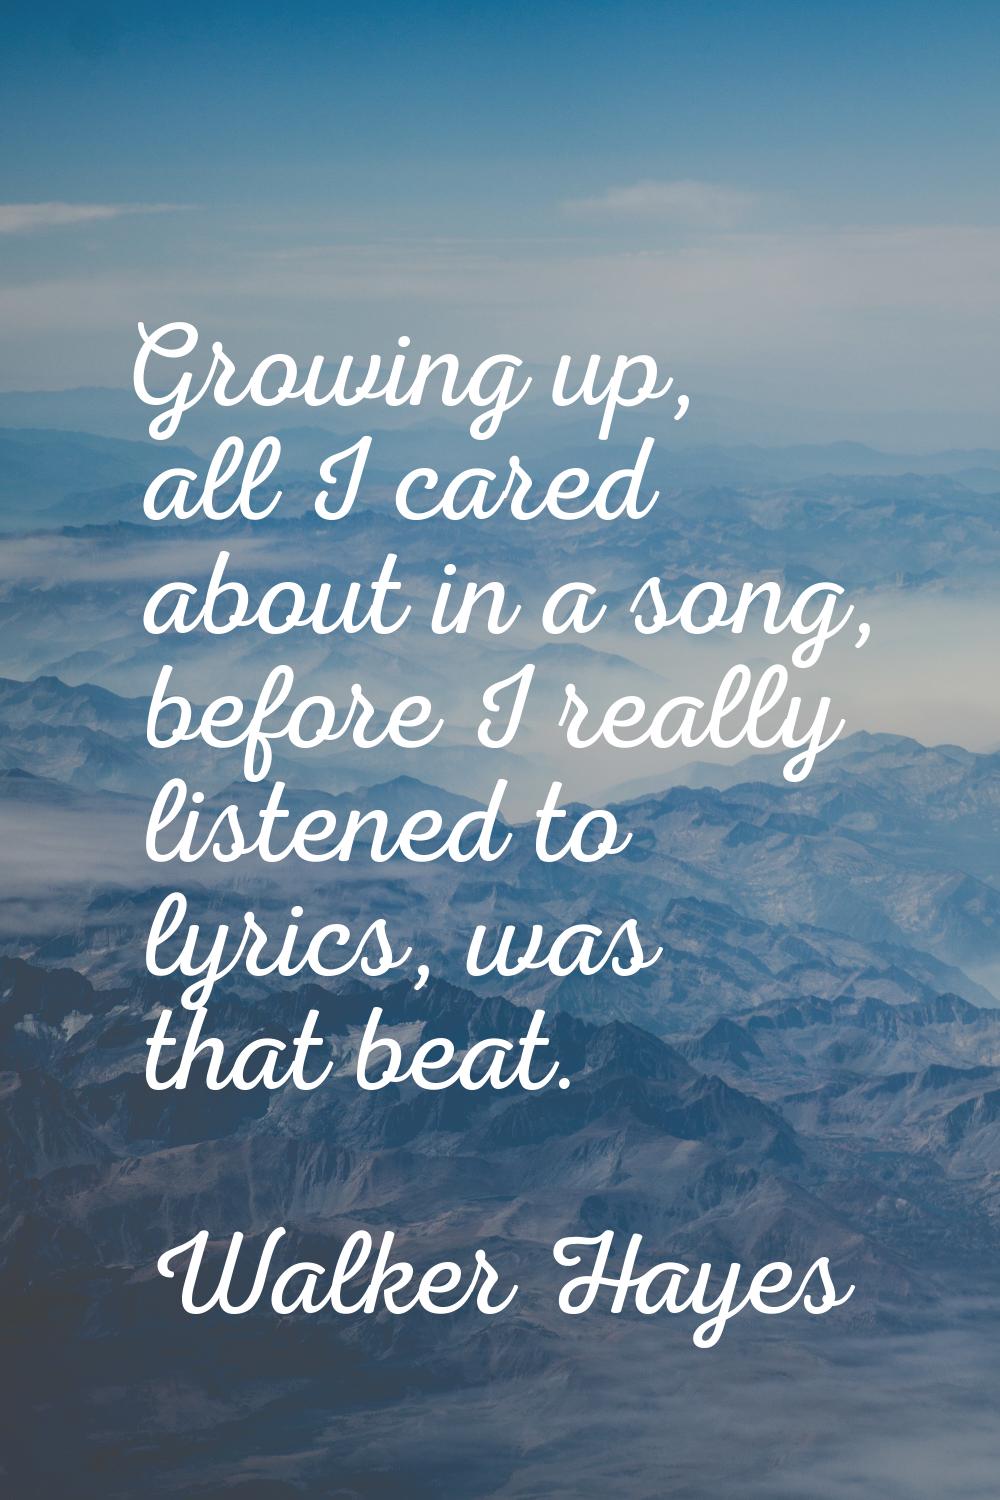 Growing up, all I cared about in a song, before I really listened to lyrics, was that beat.